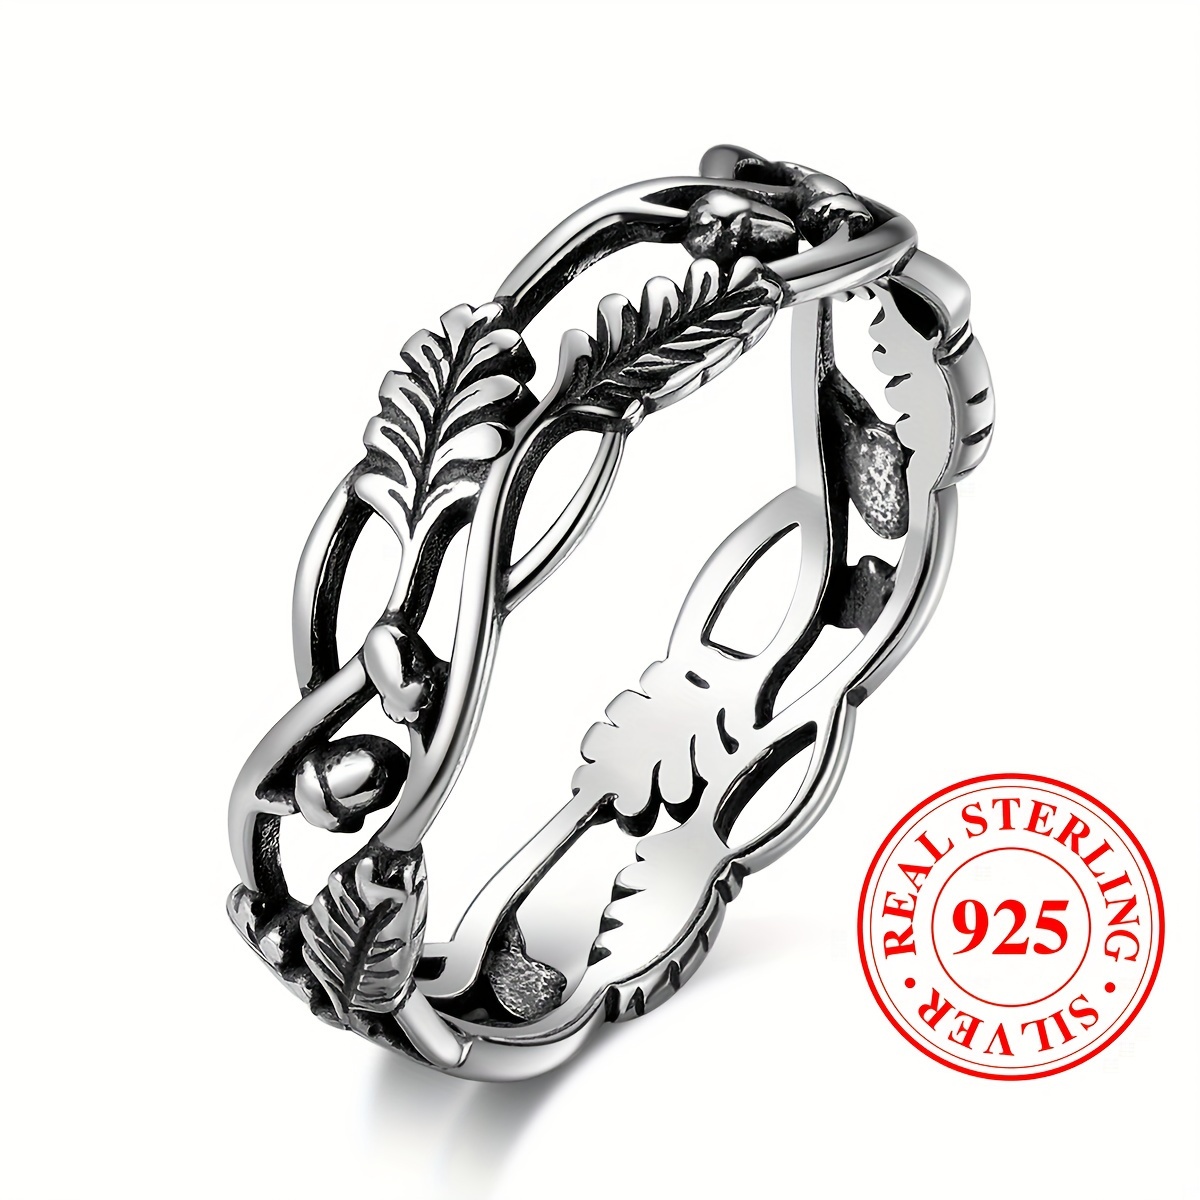 

925 Sterling Silver Band Ring Retro Branch Design Suitable For Men And Women Match Daily Outfits Party Decor High Quality Jewelry